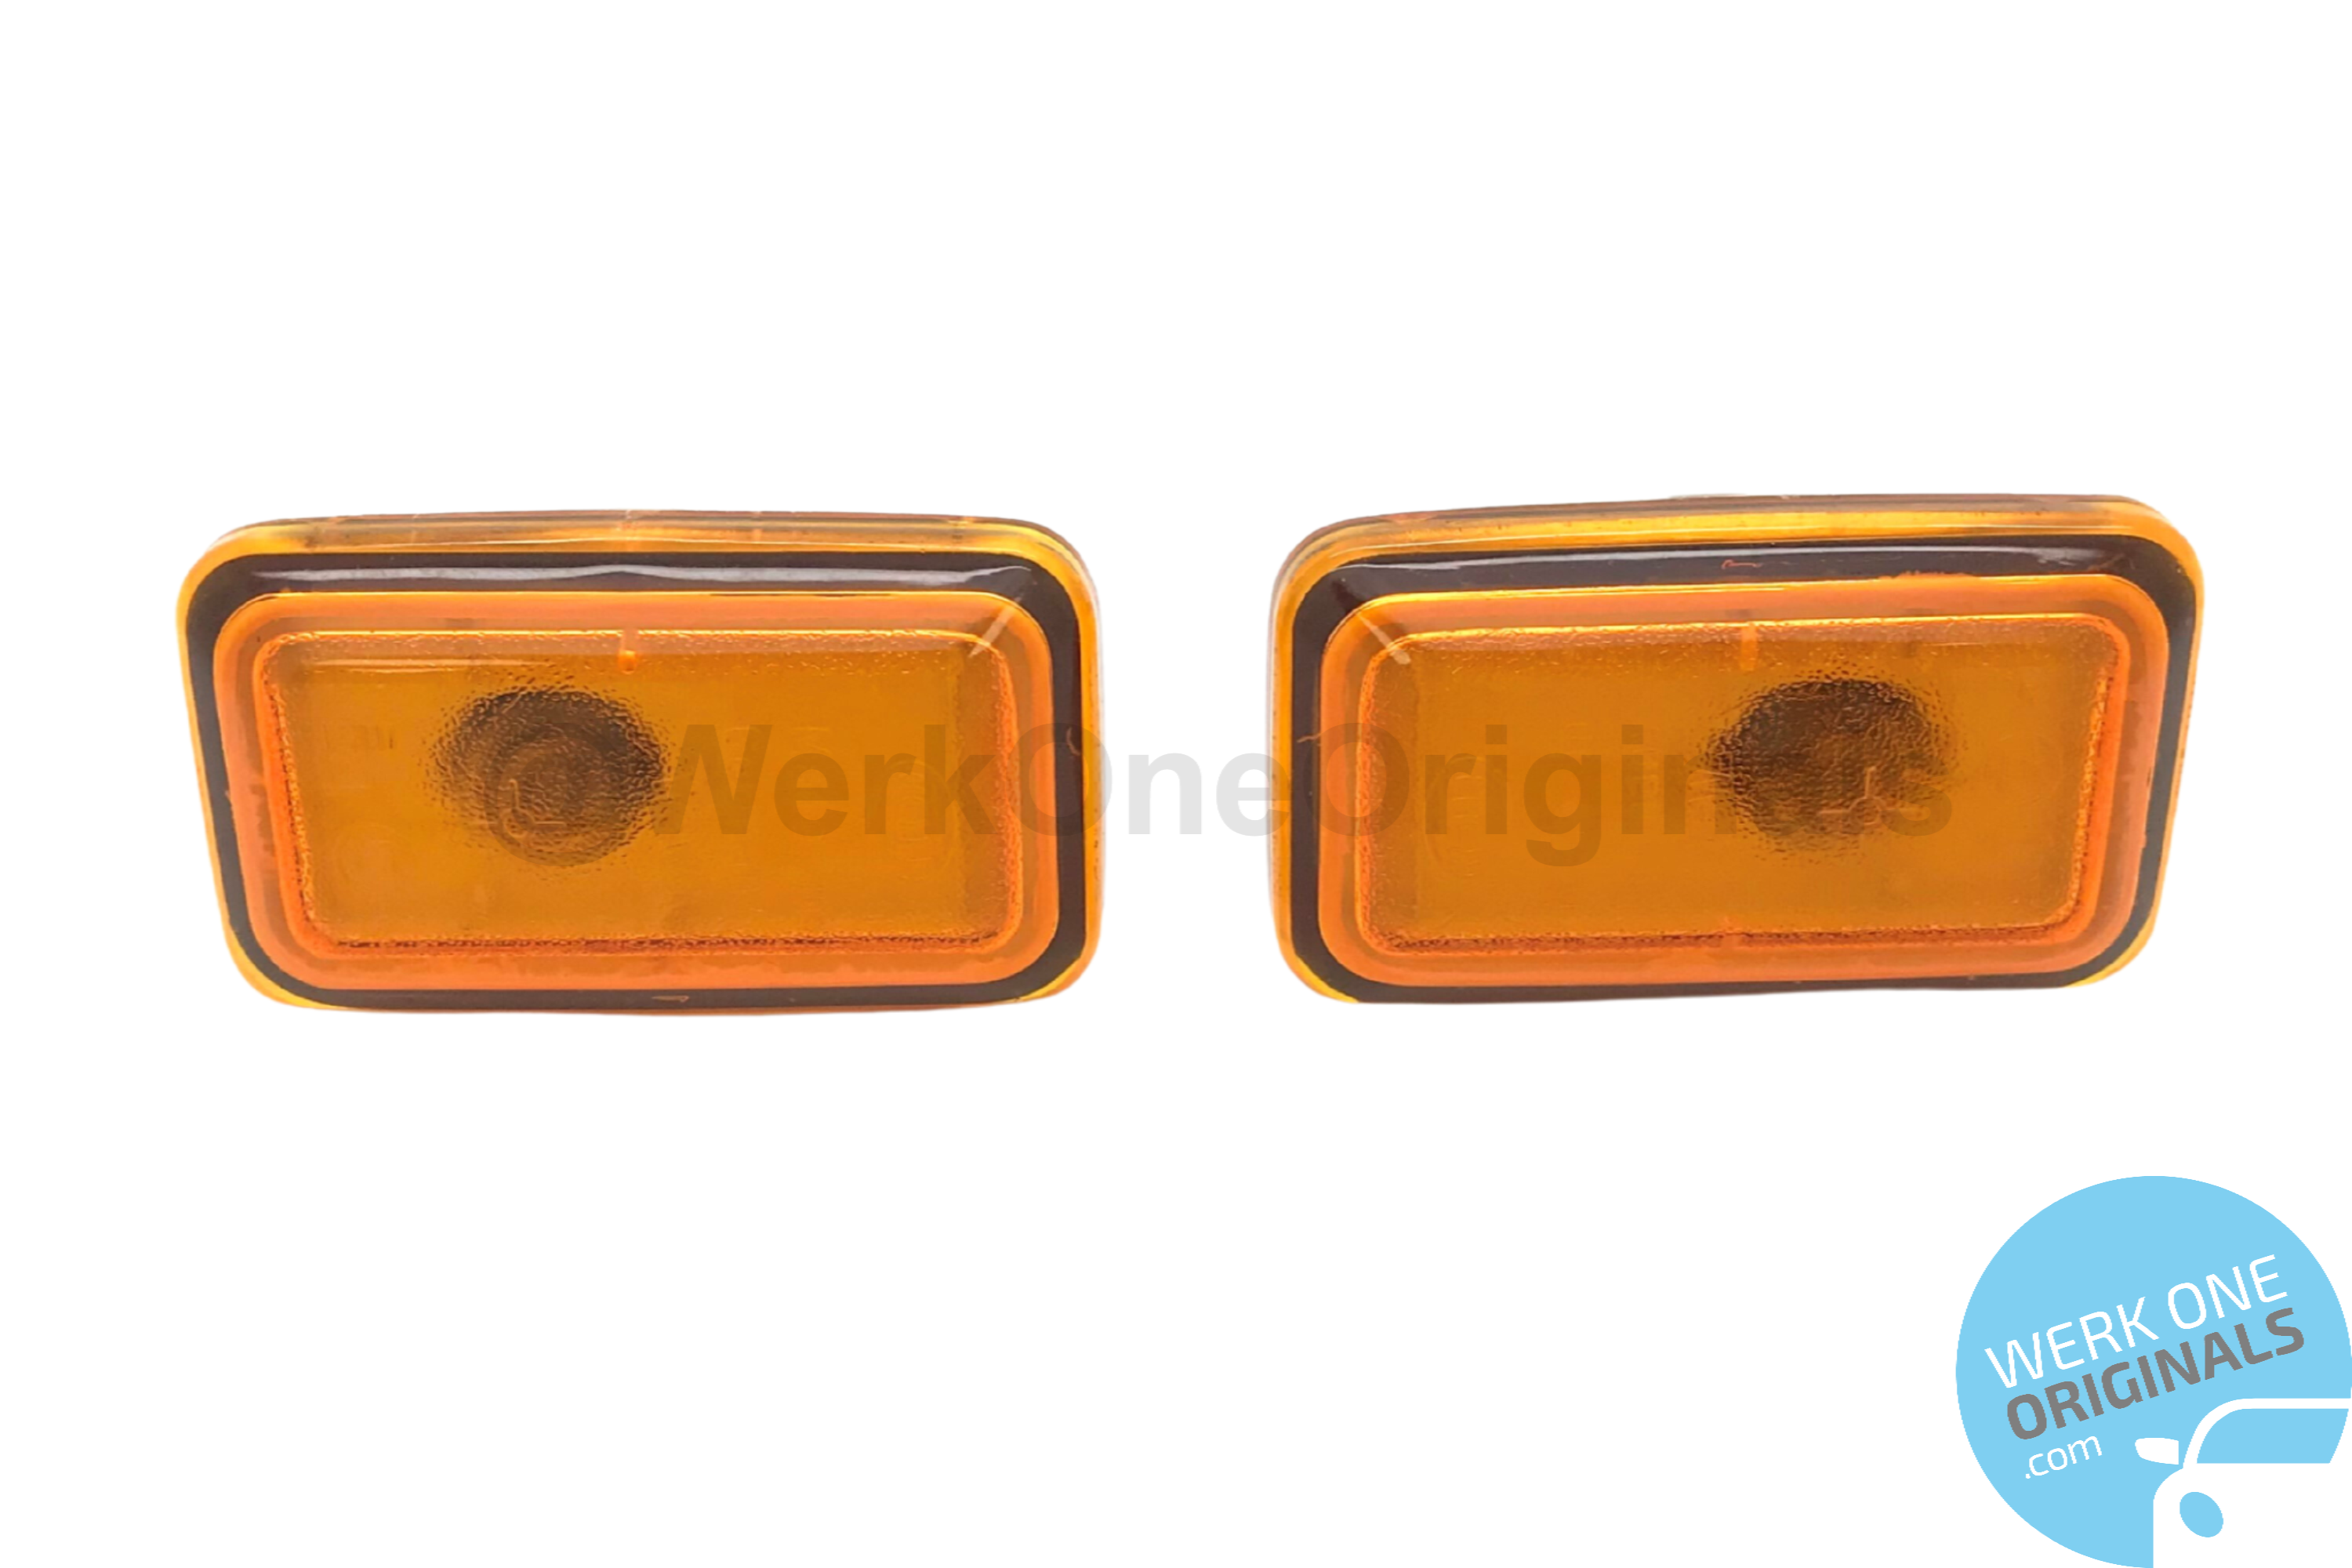 Porsche Genuine Side Repeater Indicator x2 for 911G Models